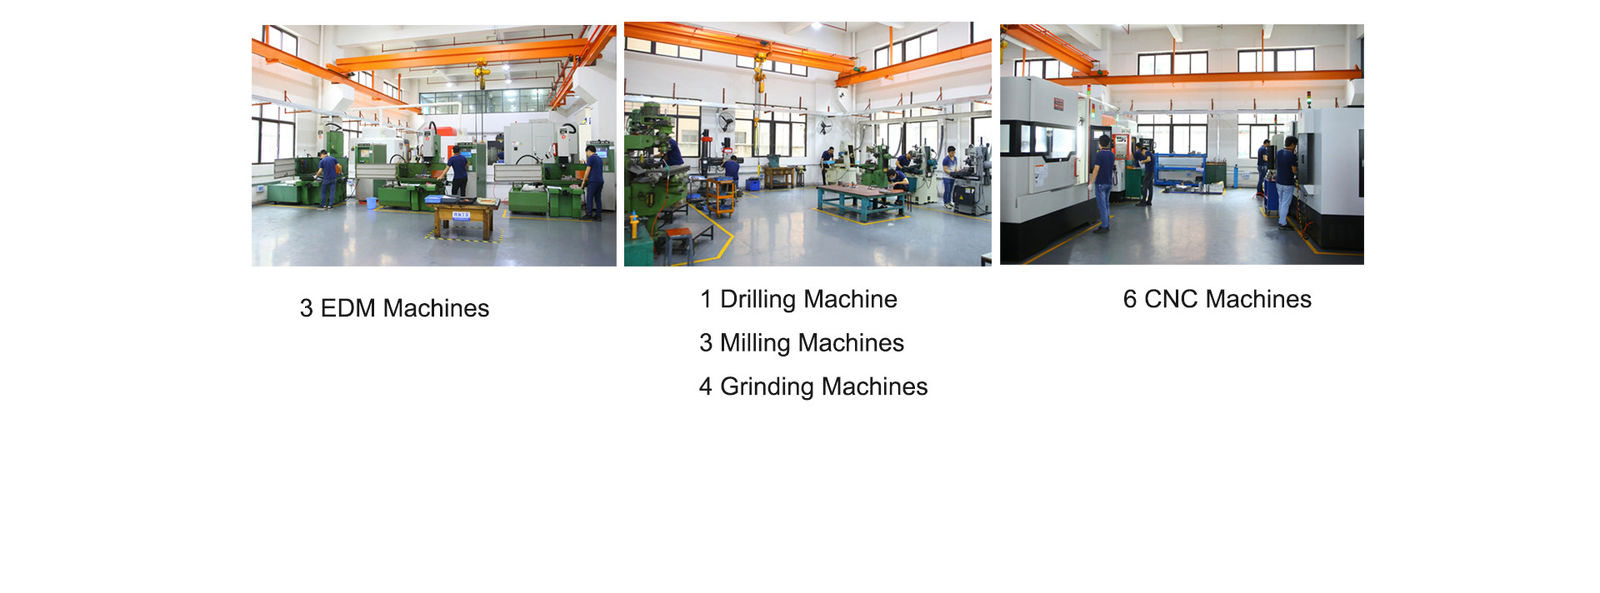 quality Plastic Injection Tooling Service